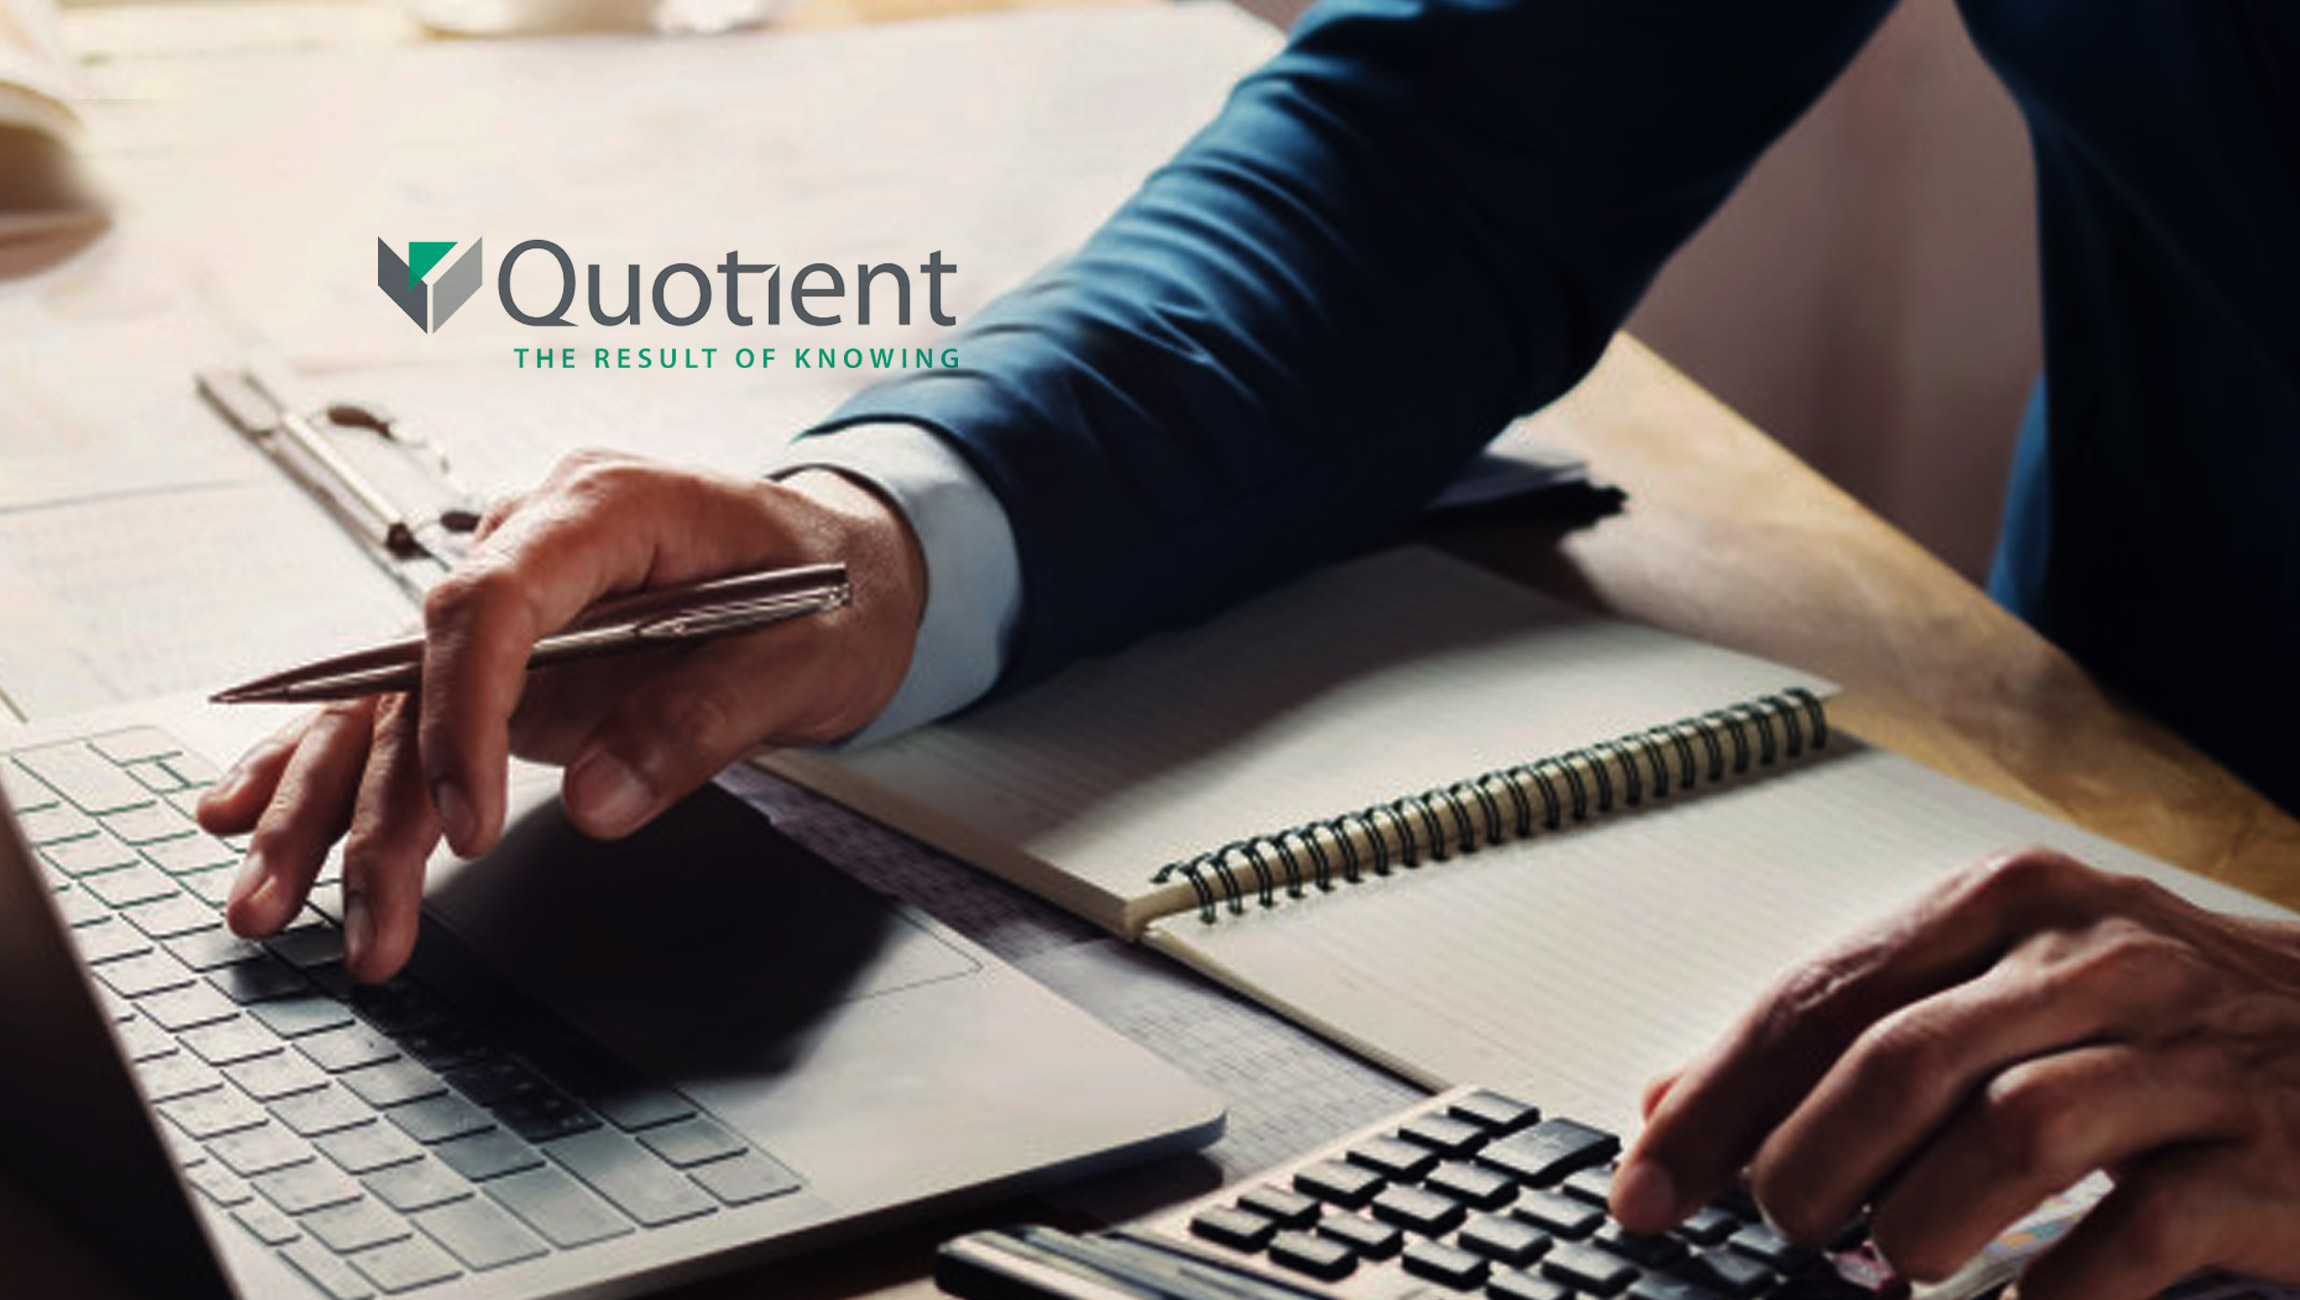 Quotient Partners with Shipt to Enable Consumer Savings with Digital Coupons